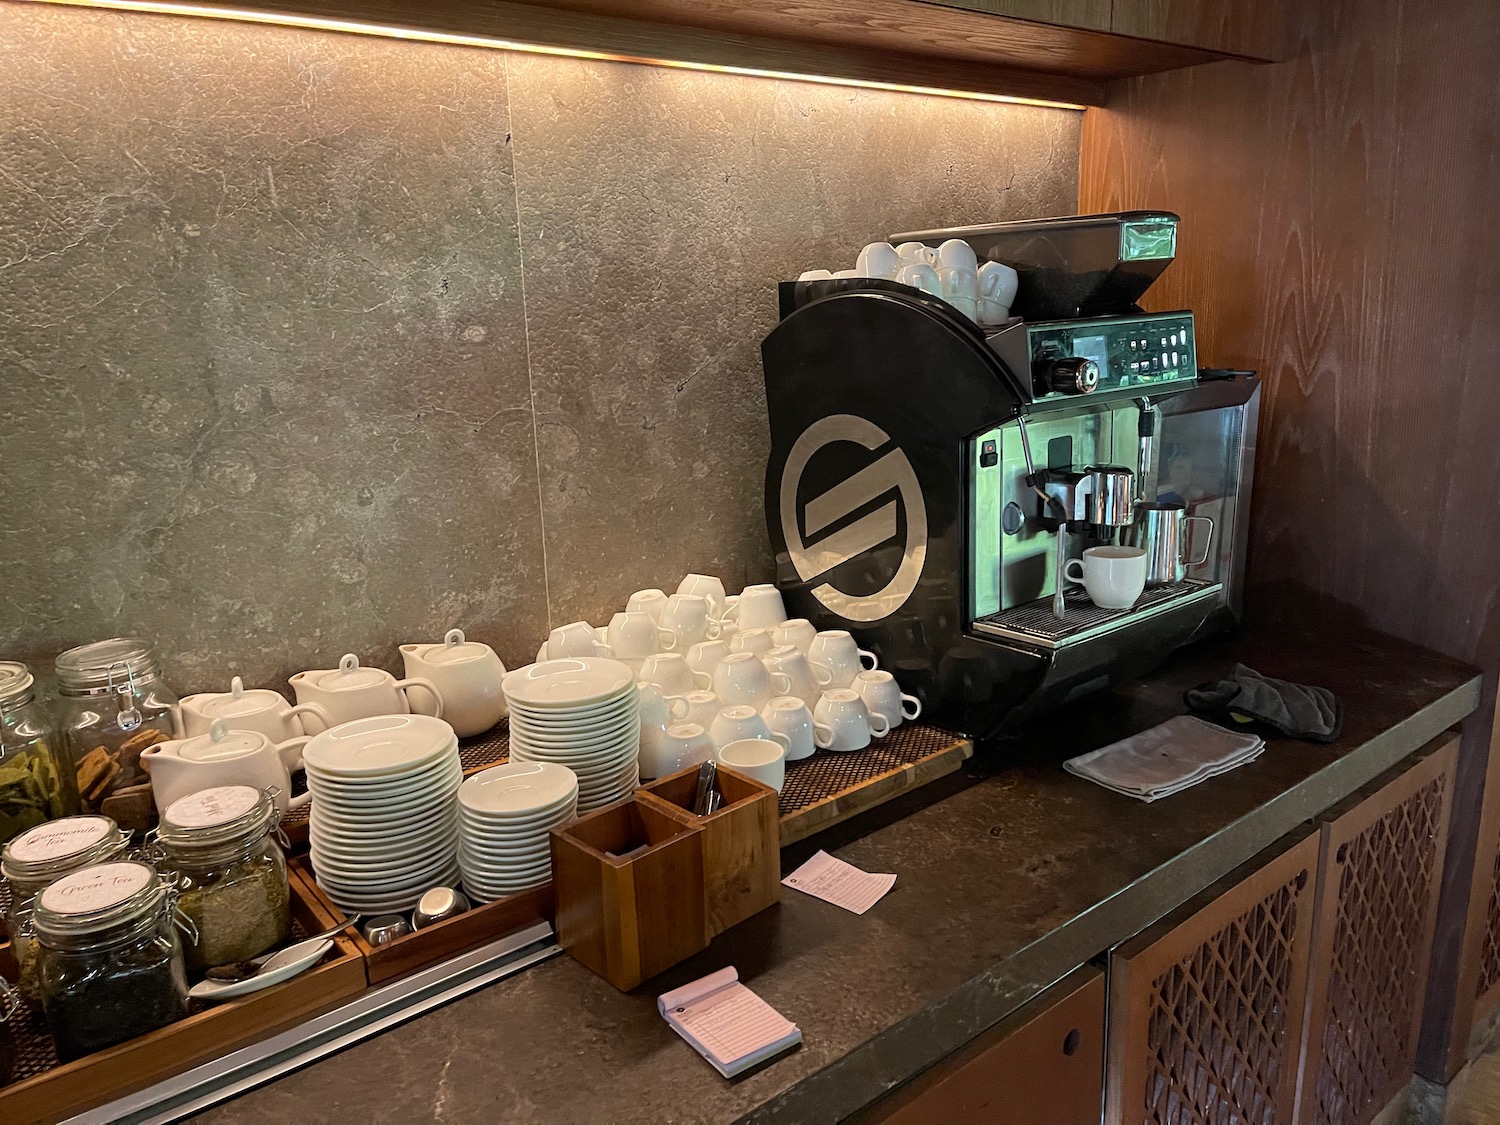 a coffee machine with white cups and plates on a counter